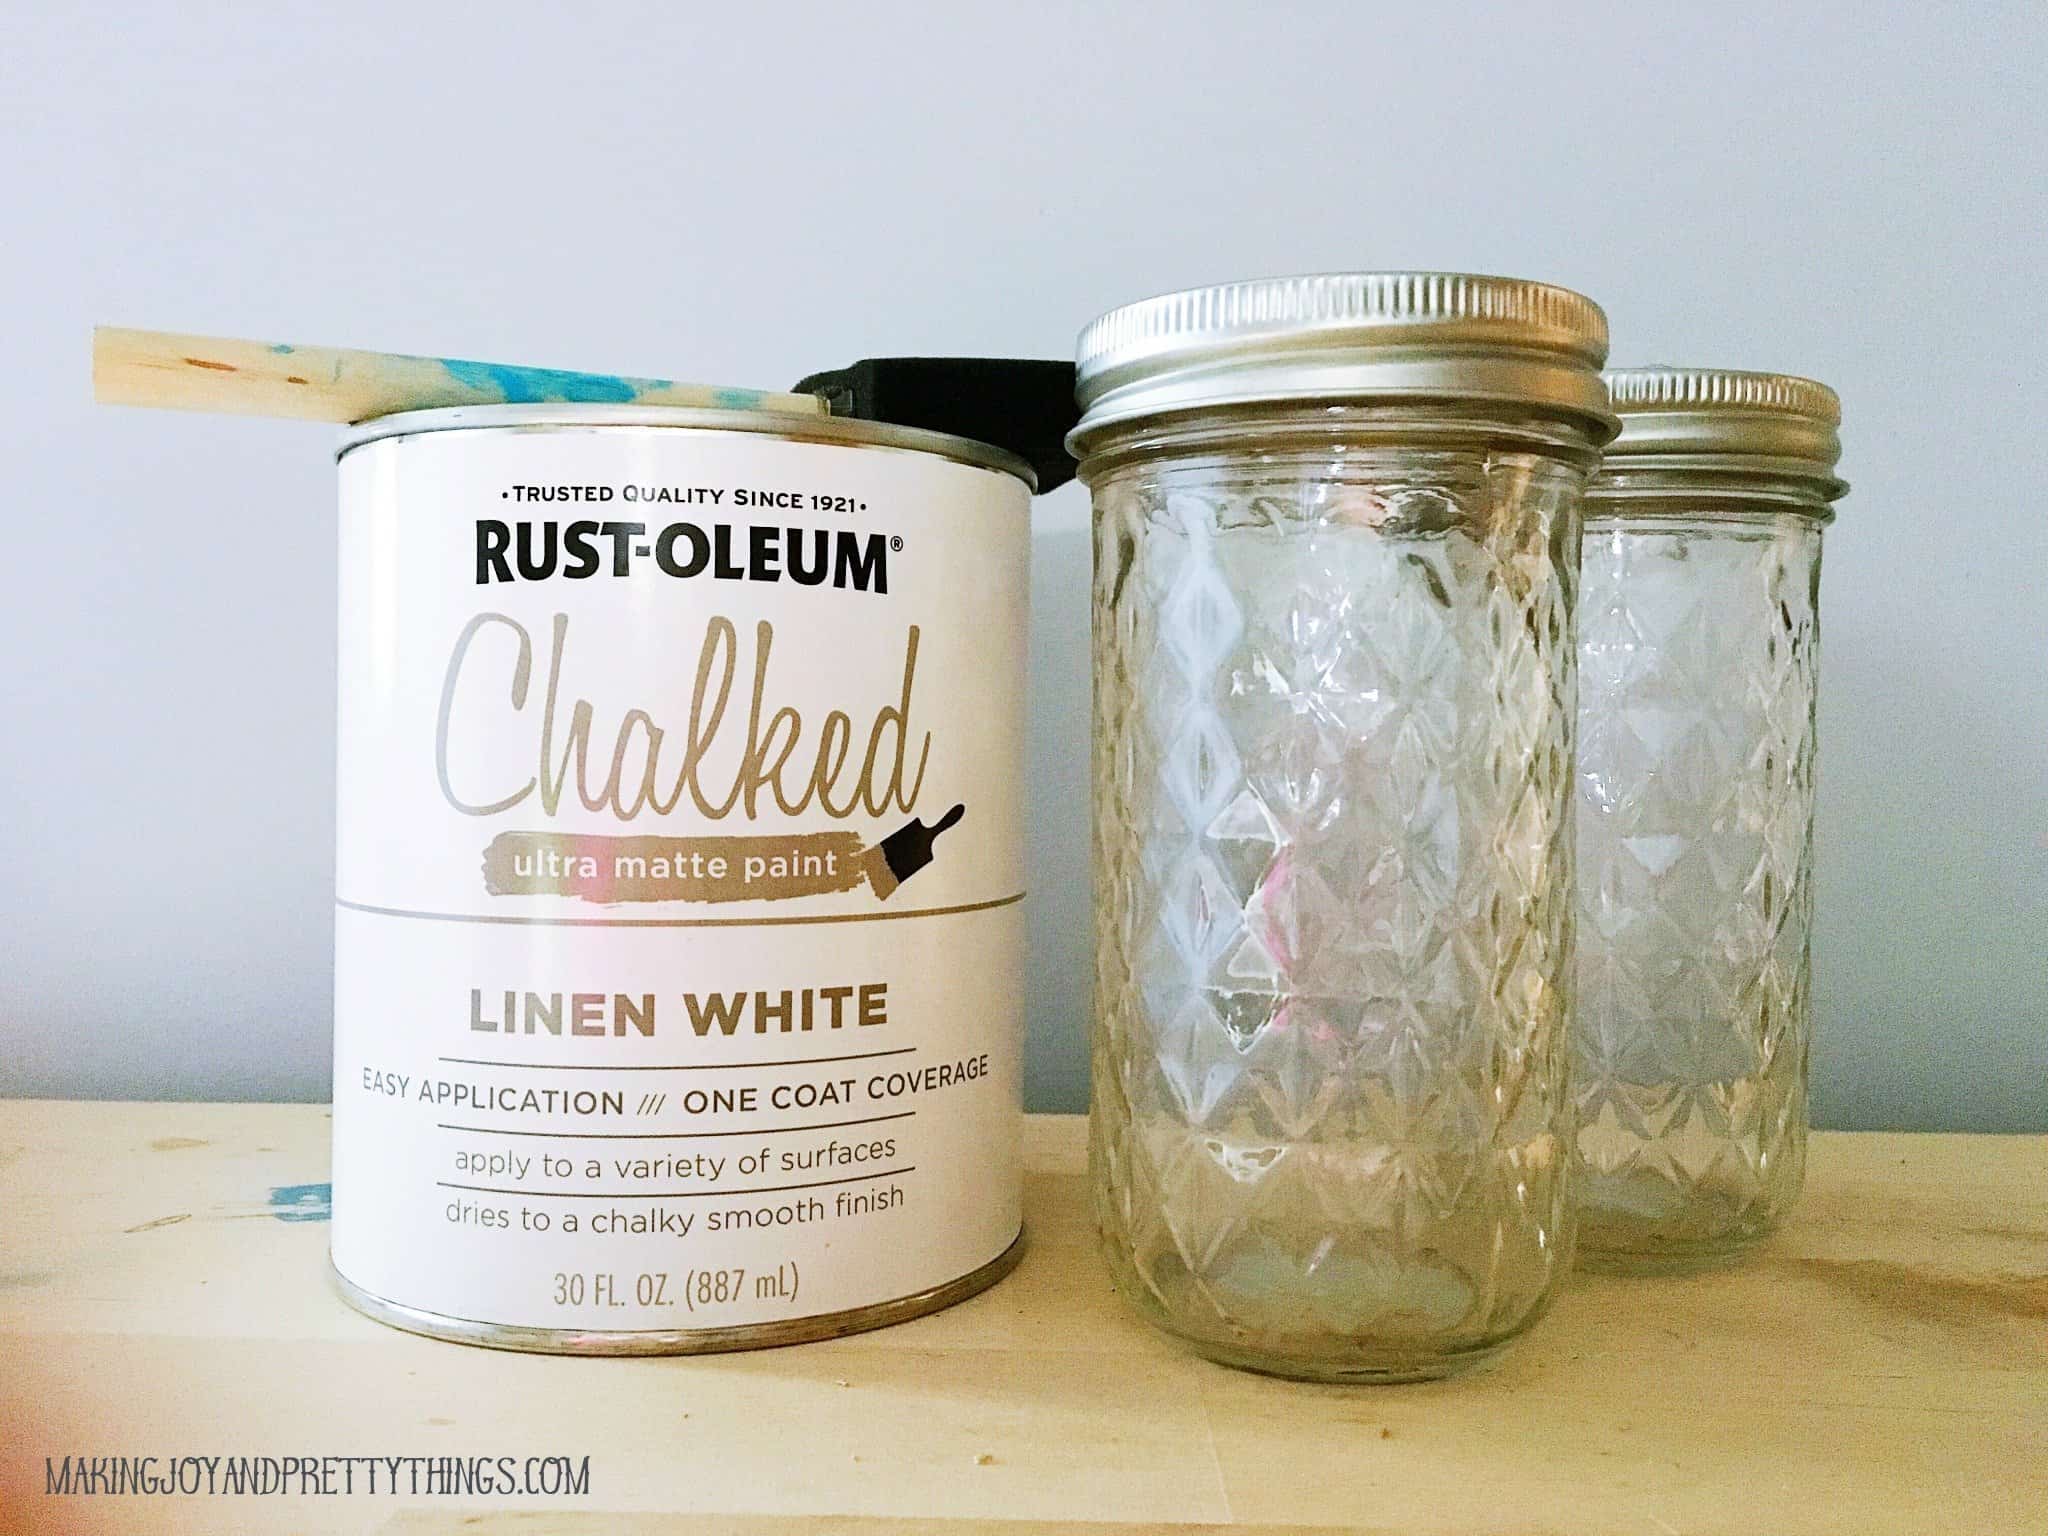 Supplies you need to paint jelly jars in a linen white chalk paint in order to distress them for teach gift